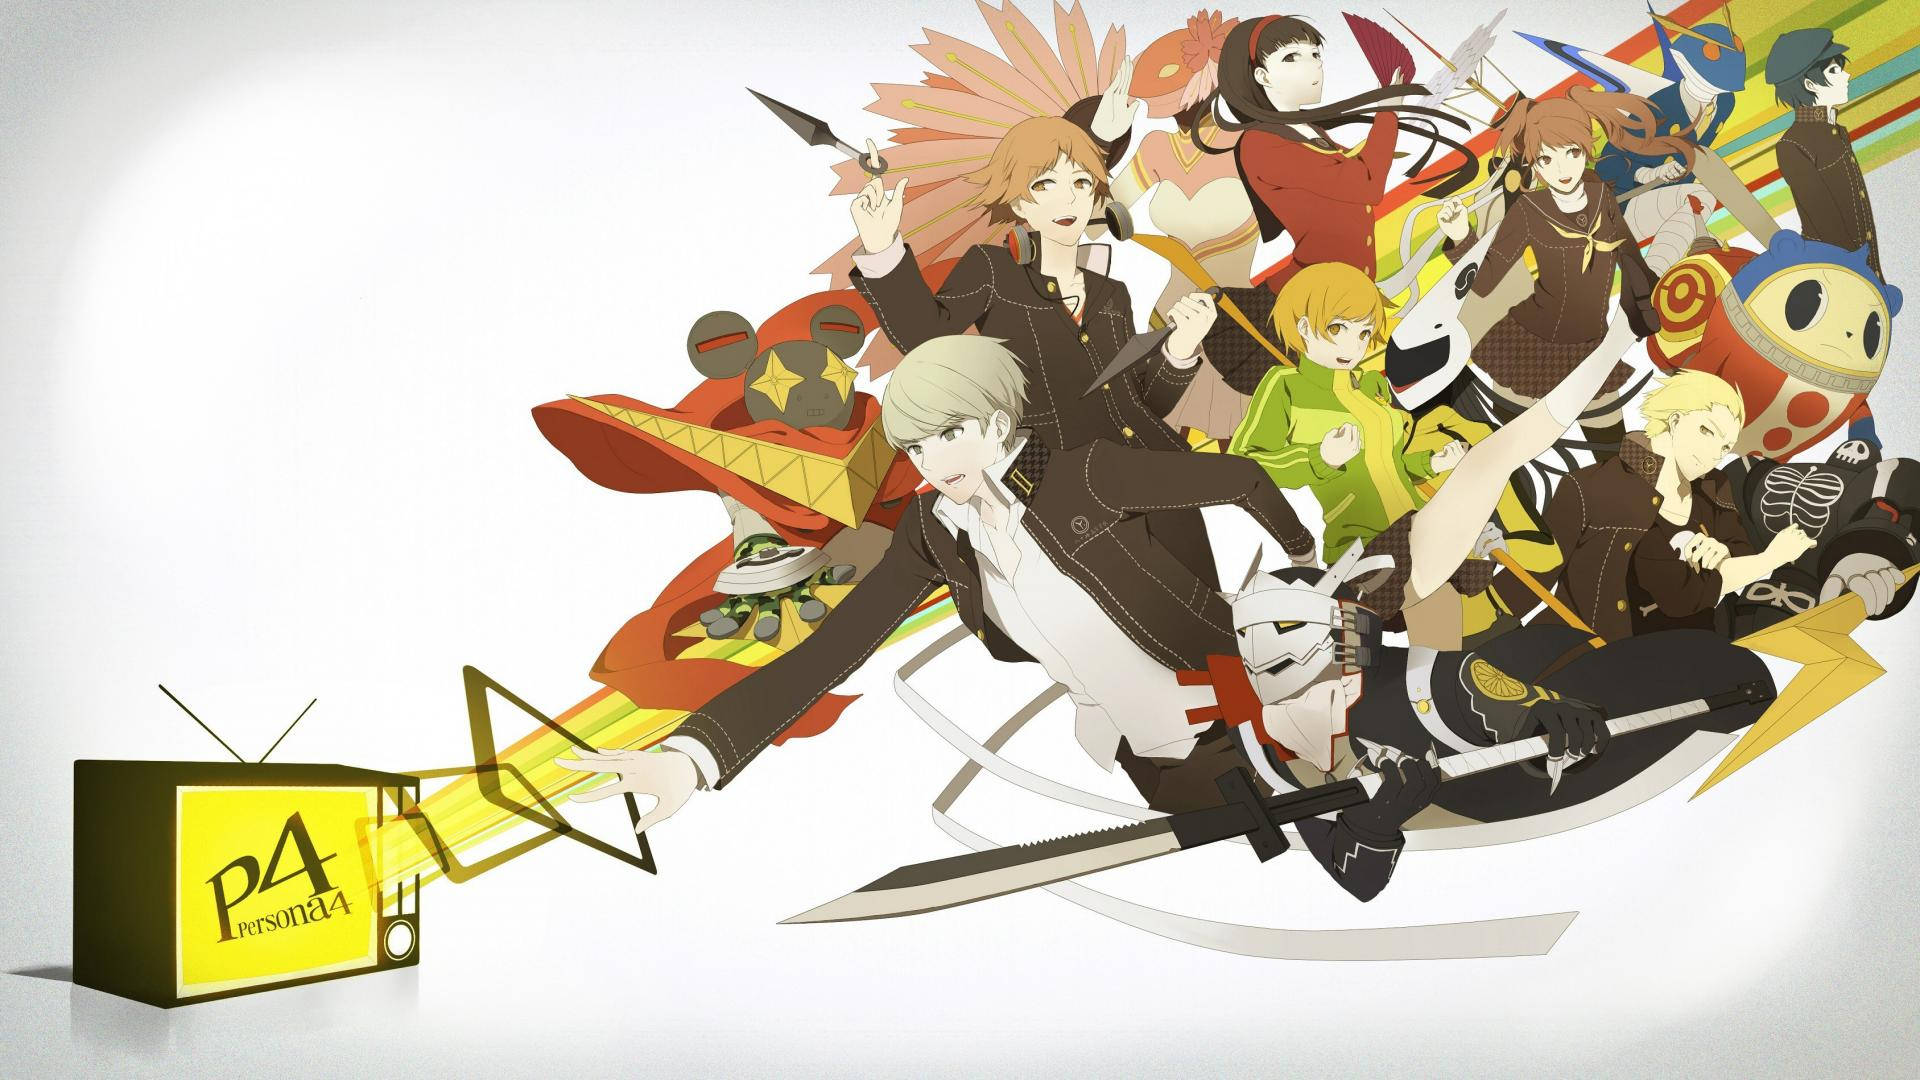 Journey through the TV World with the heroes of Persona 4 Wallpaper